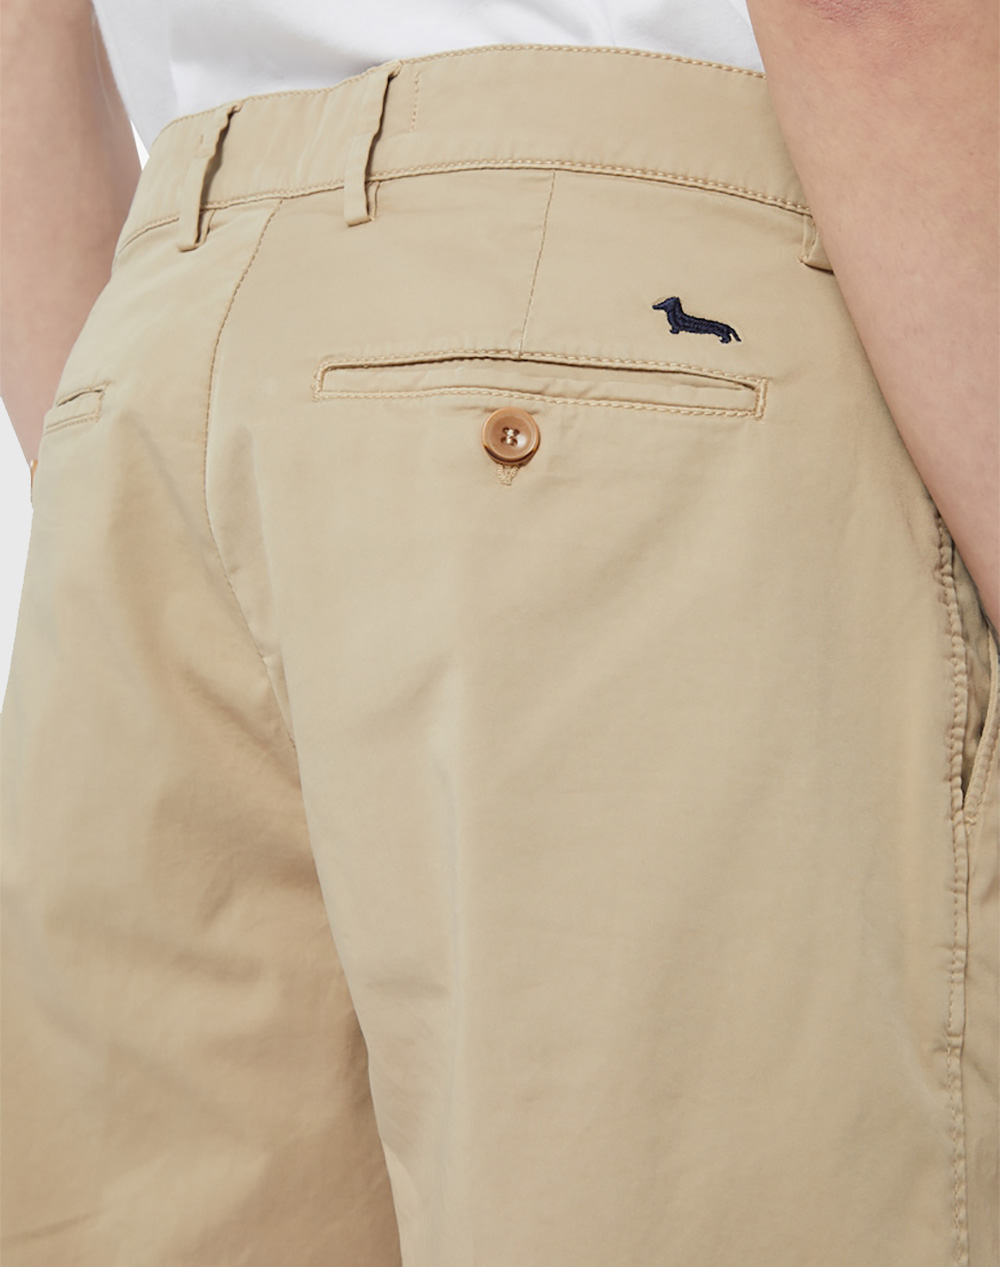 5pocket trousers with embroidered dachshund  HARMONT  BLAINE   Pellecchia Store